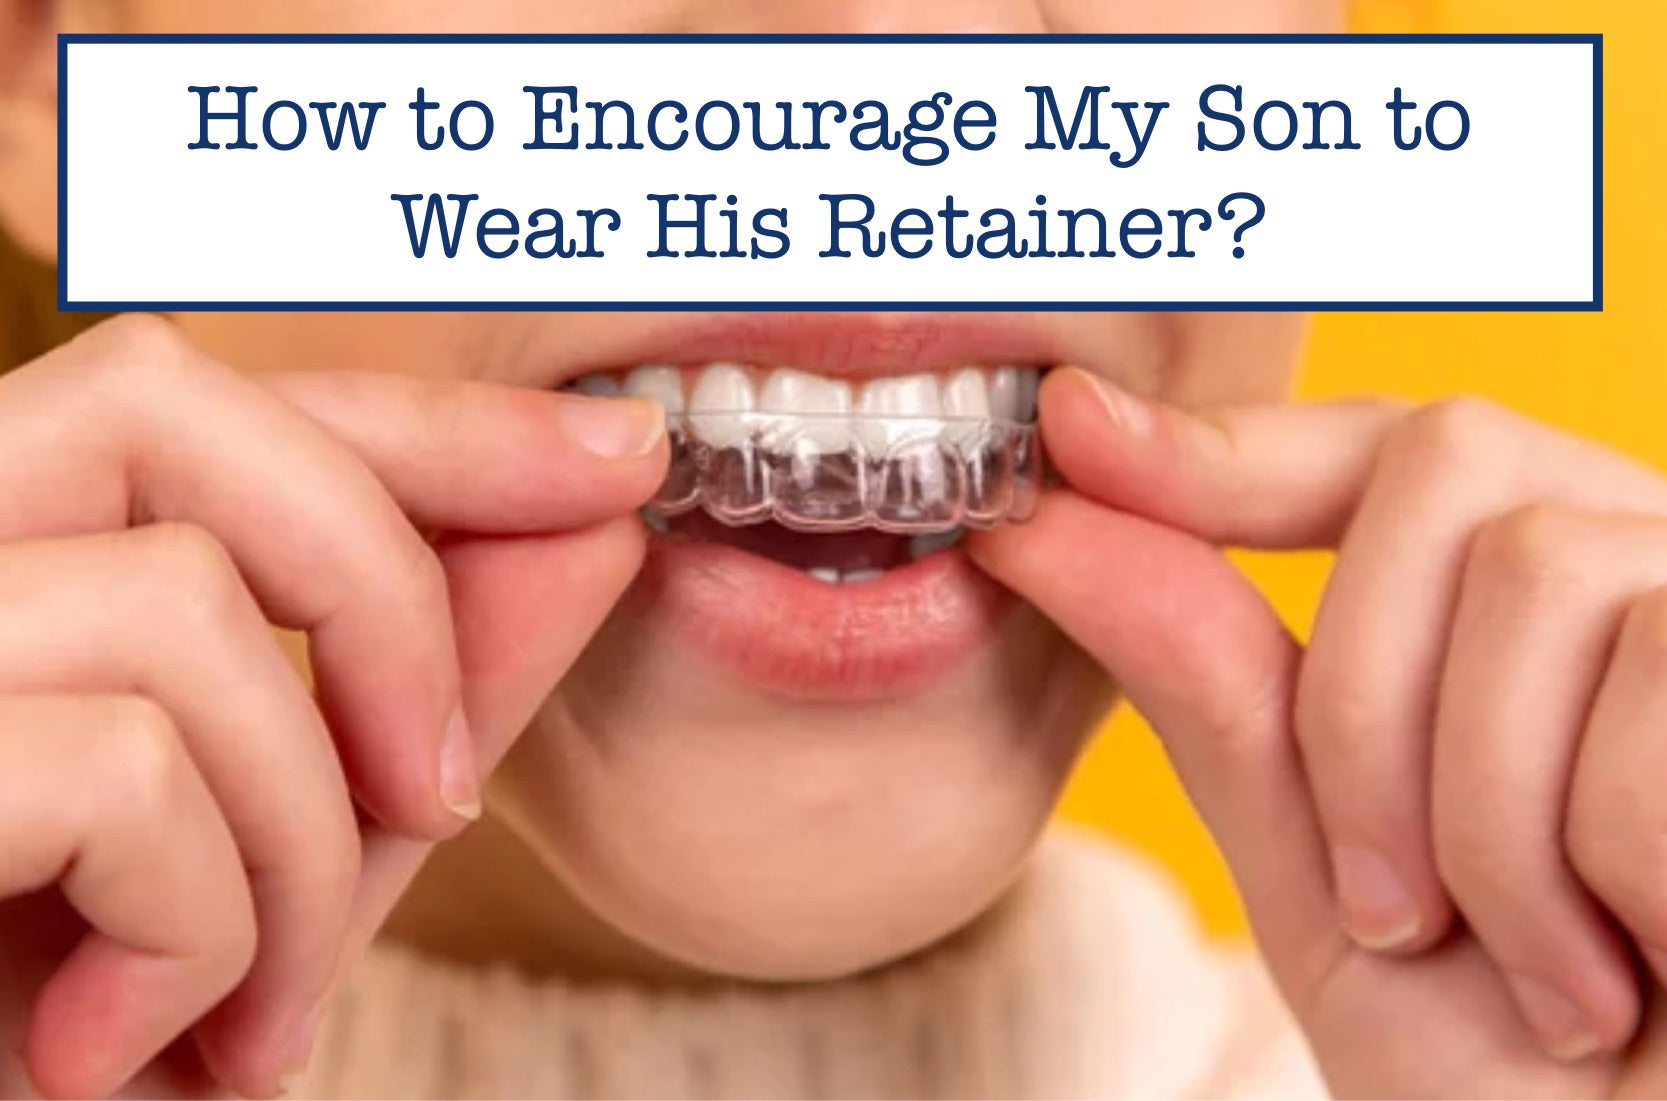 How to Encourage My Son to Wear His Retainer?